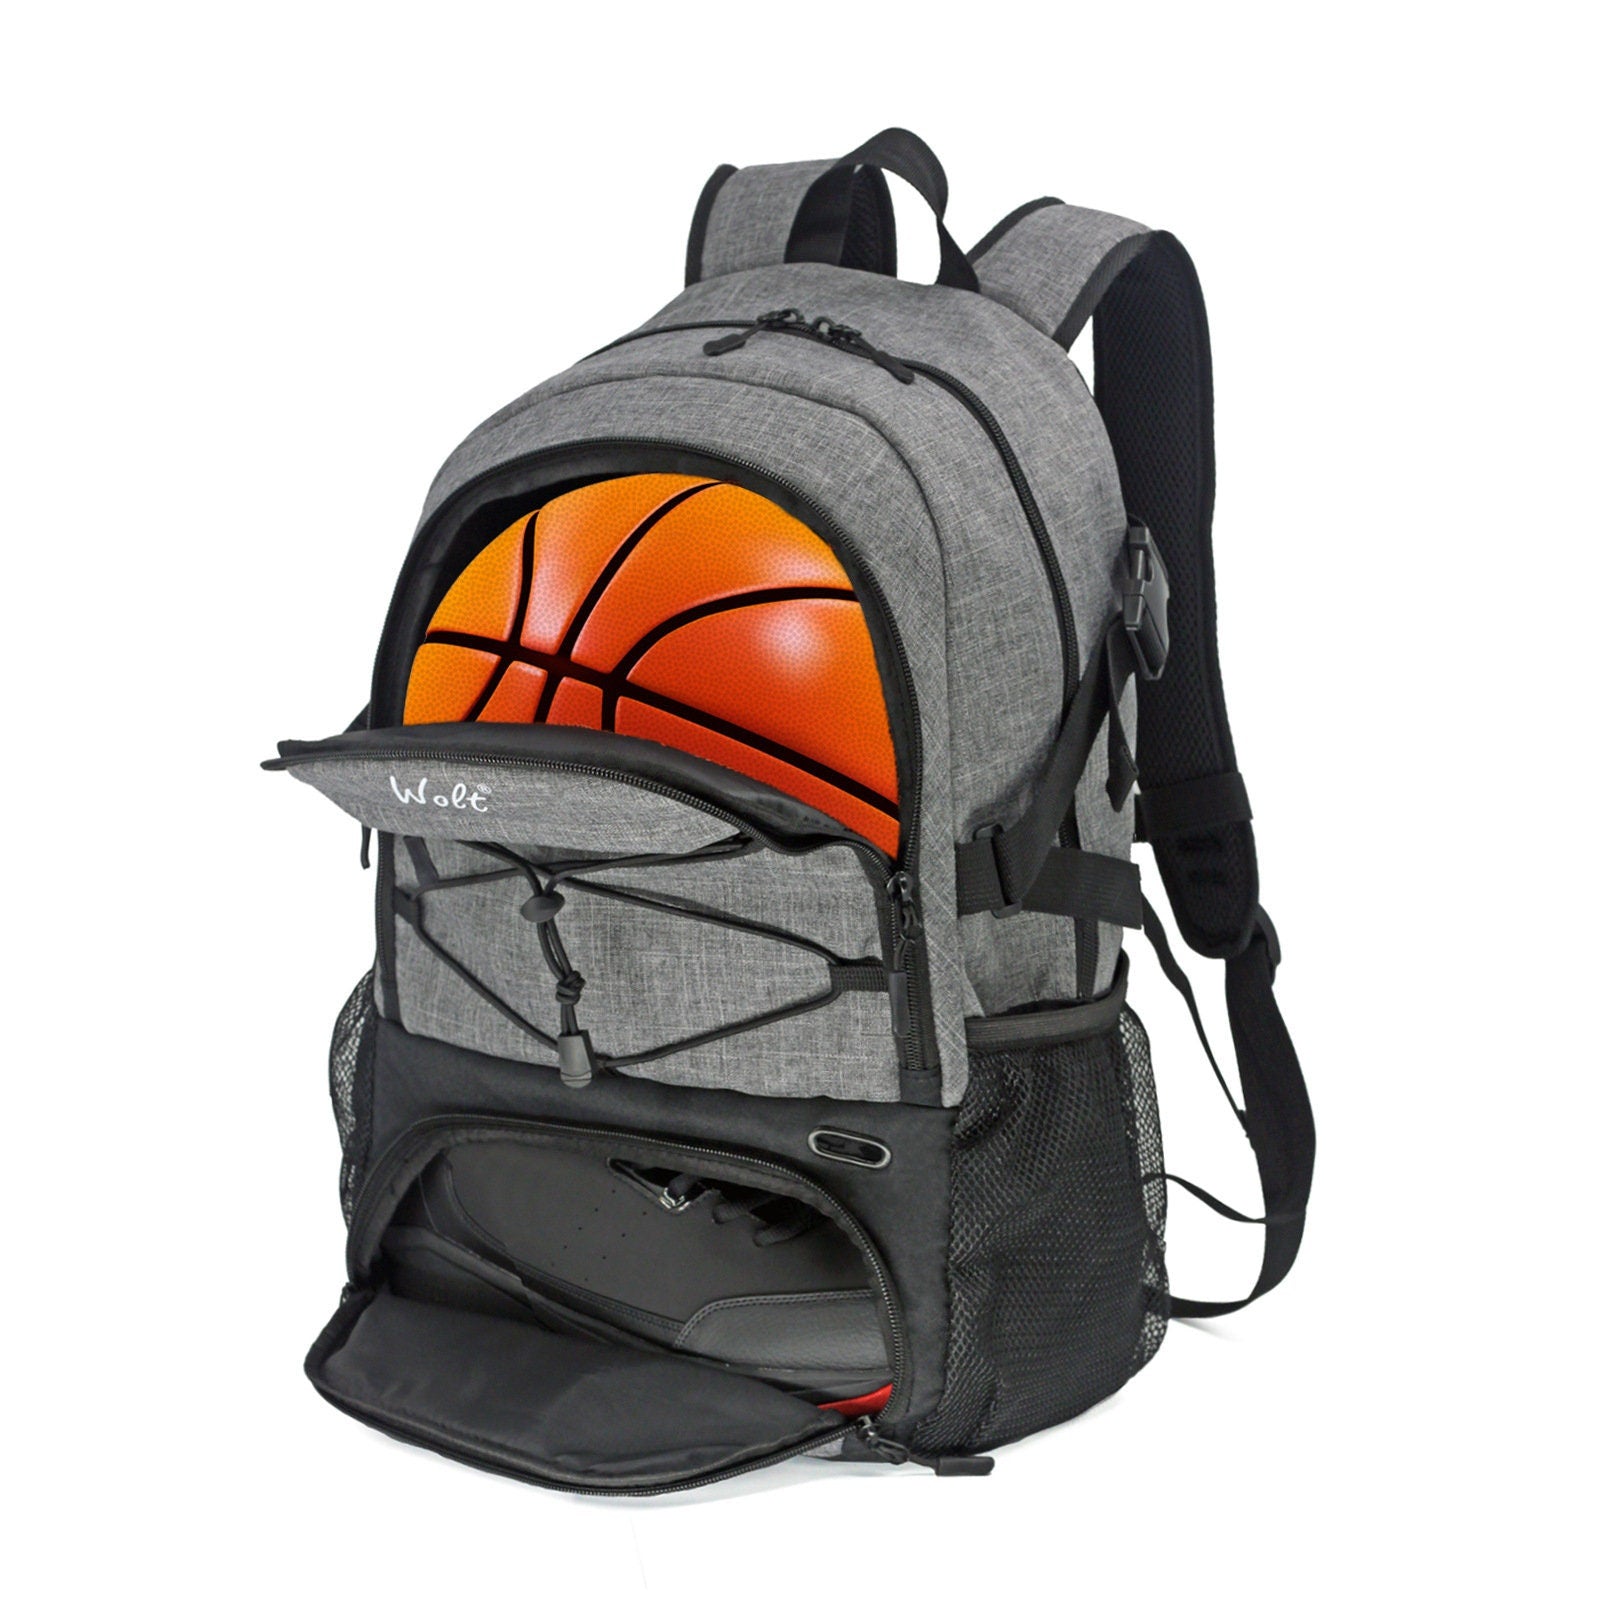 Personalized Custom Name Basketball backpack - Shoes & bag Compartment